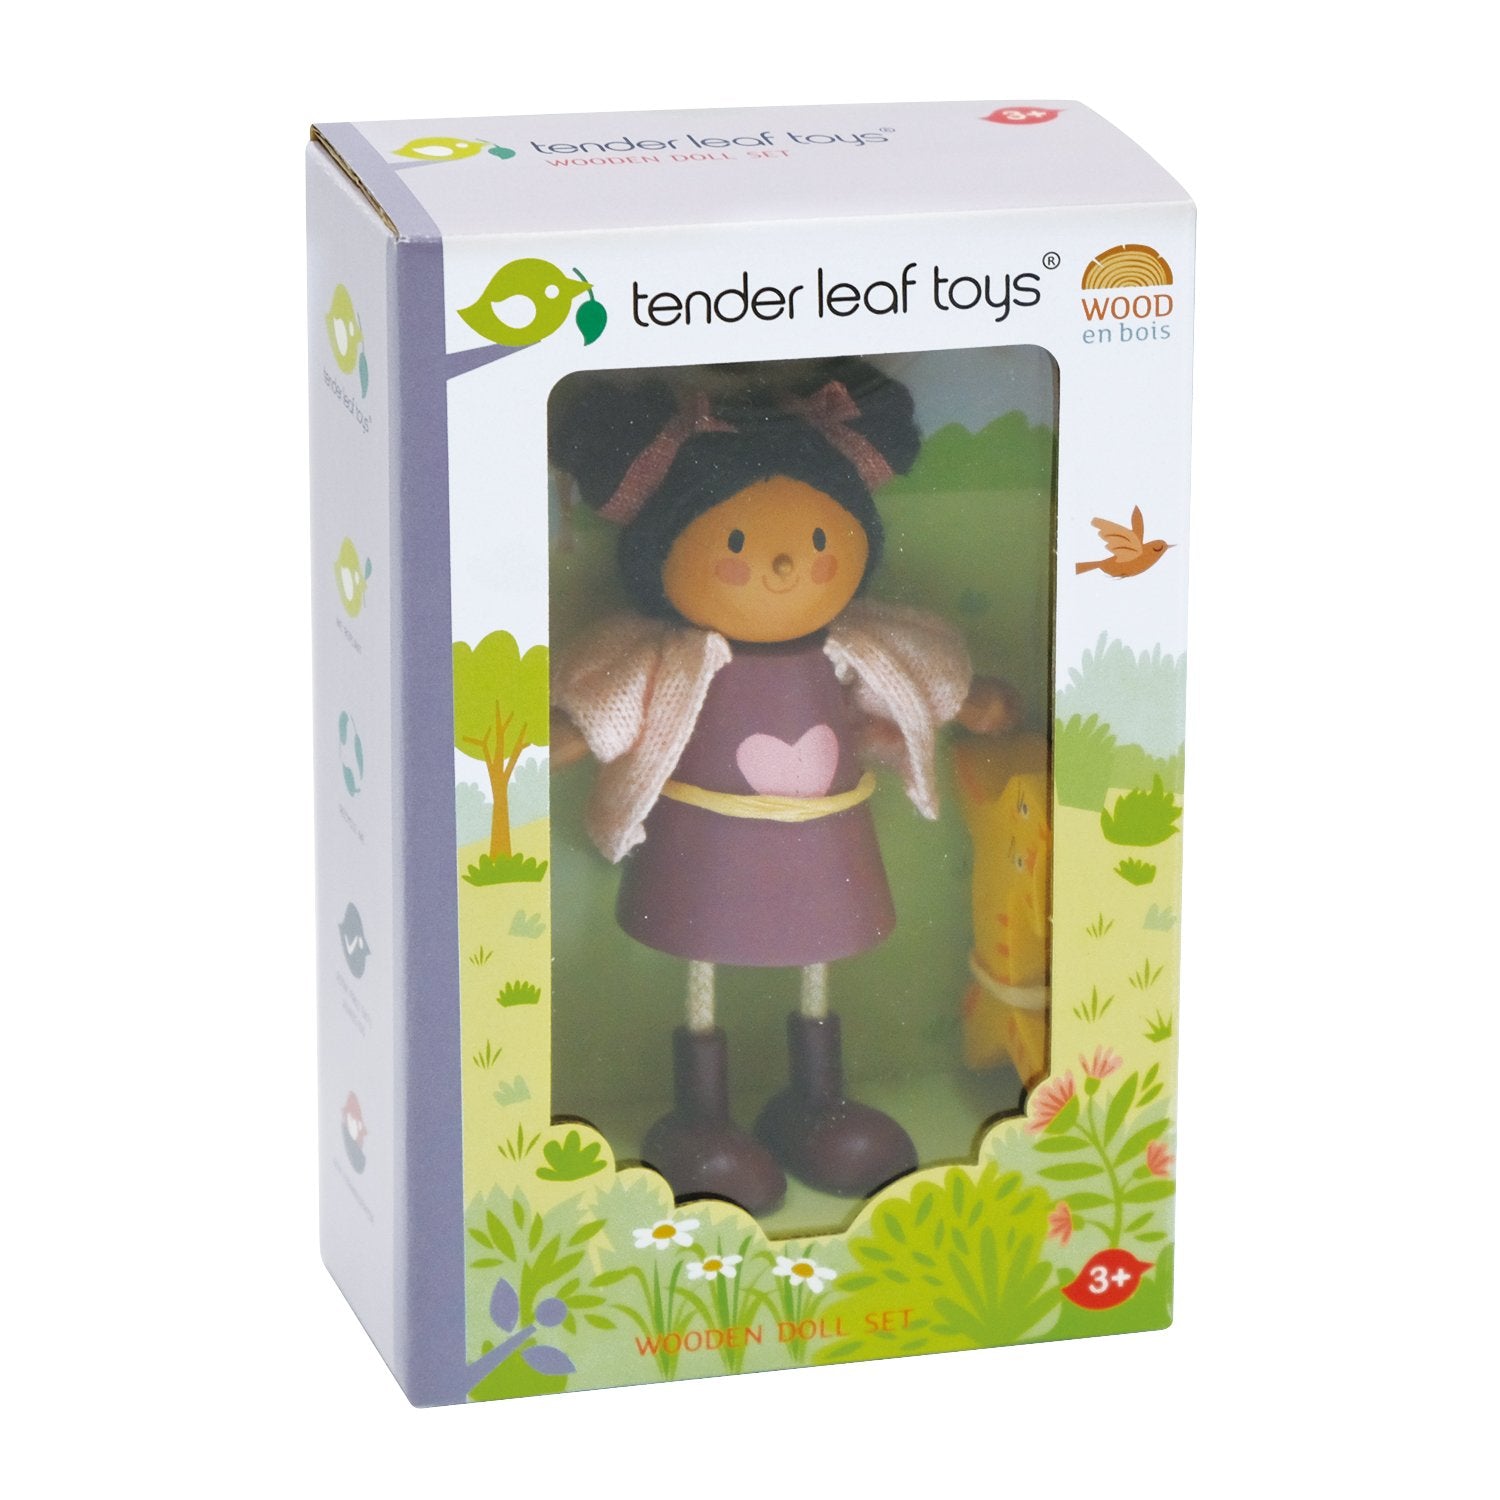 Tender Leaf Toys Wooden Doll Set - Ayana and Kitten